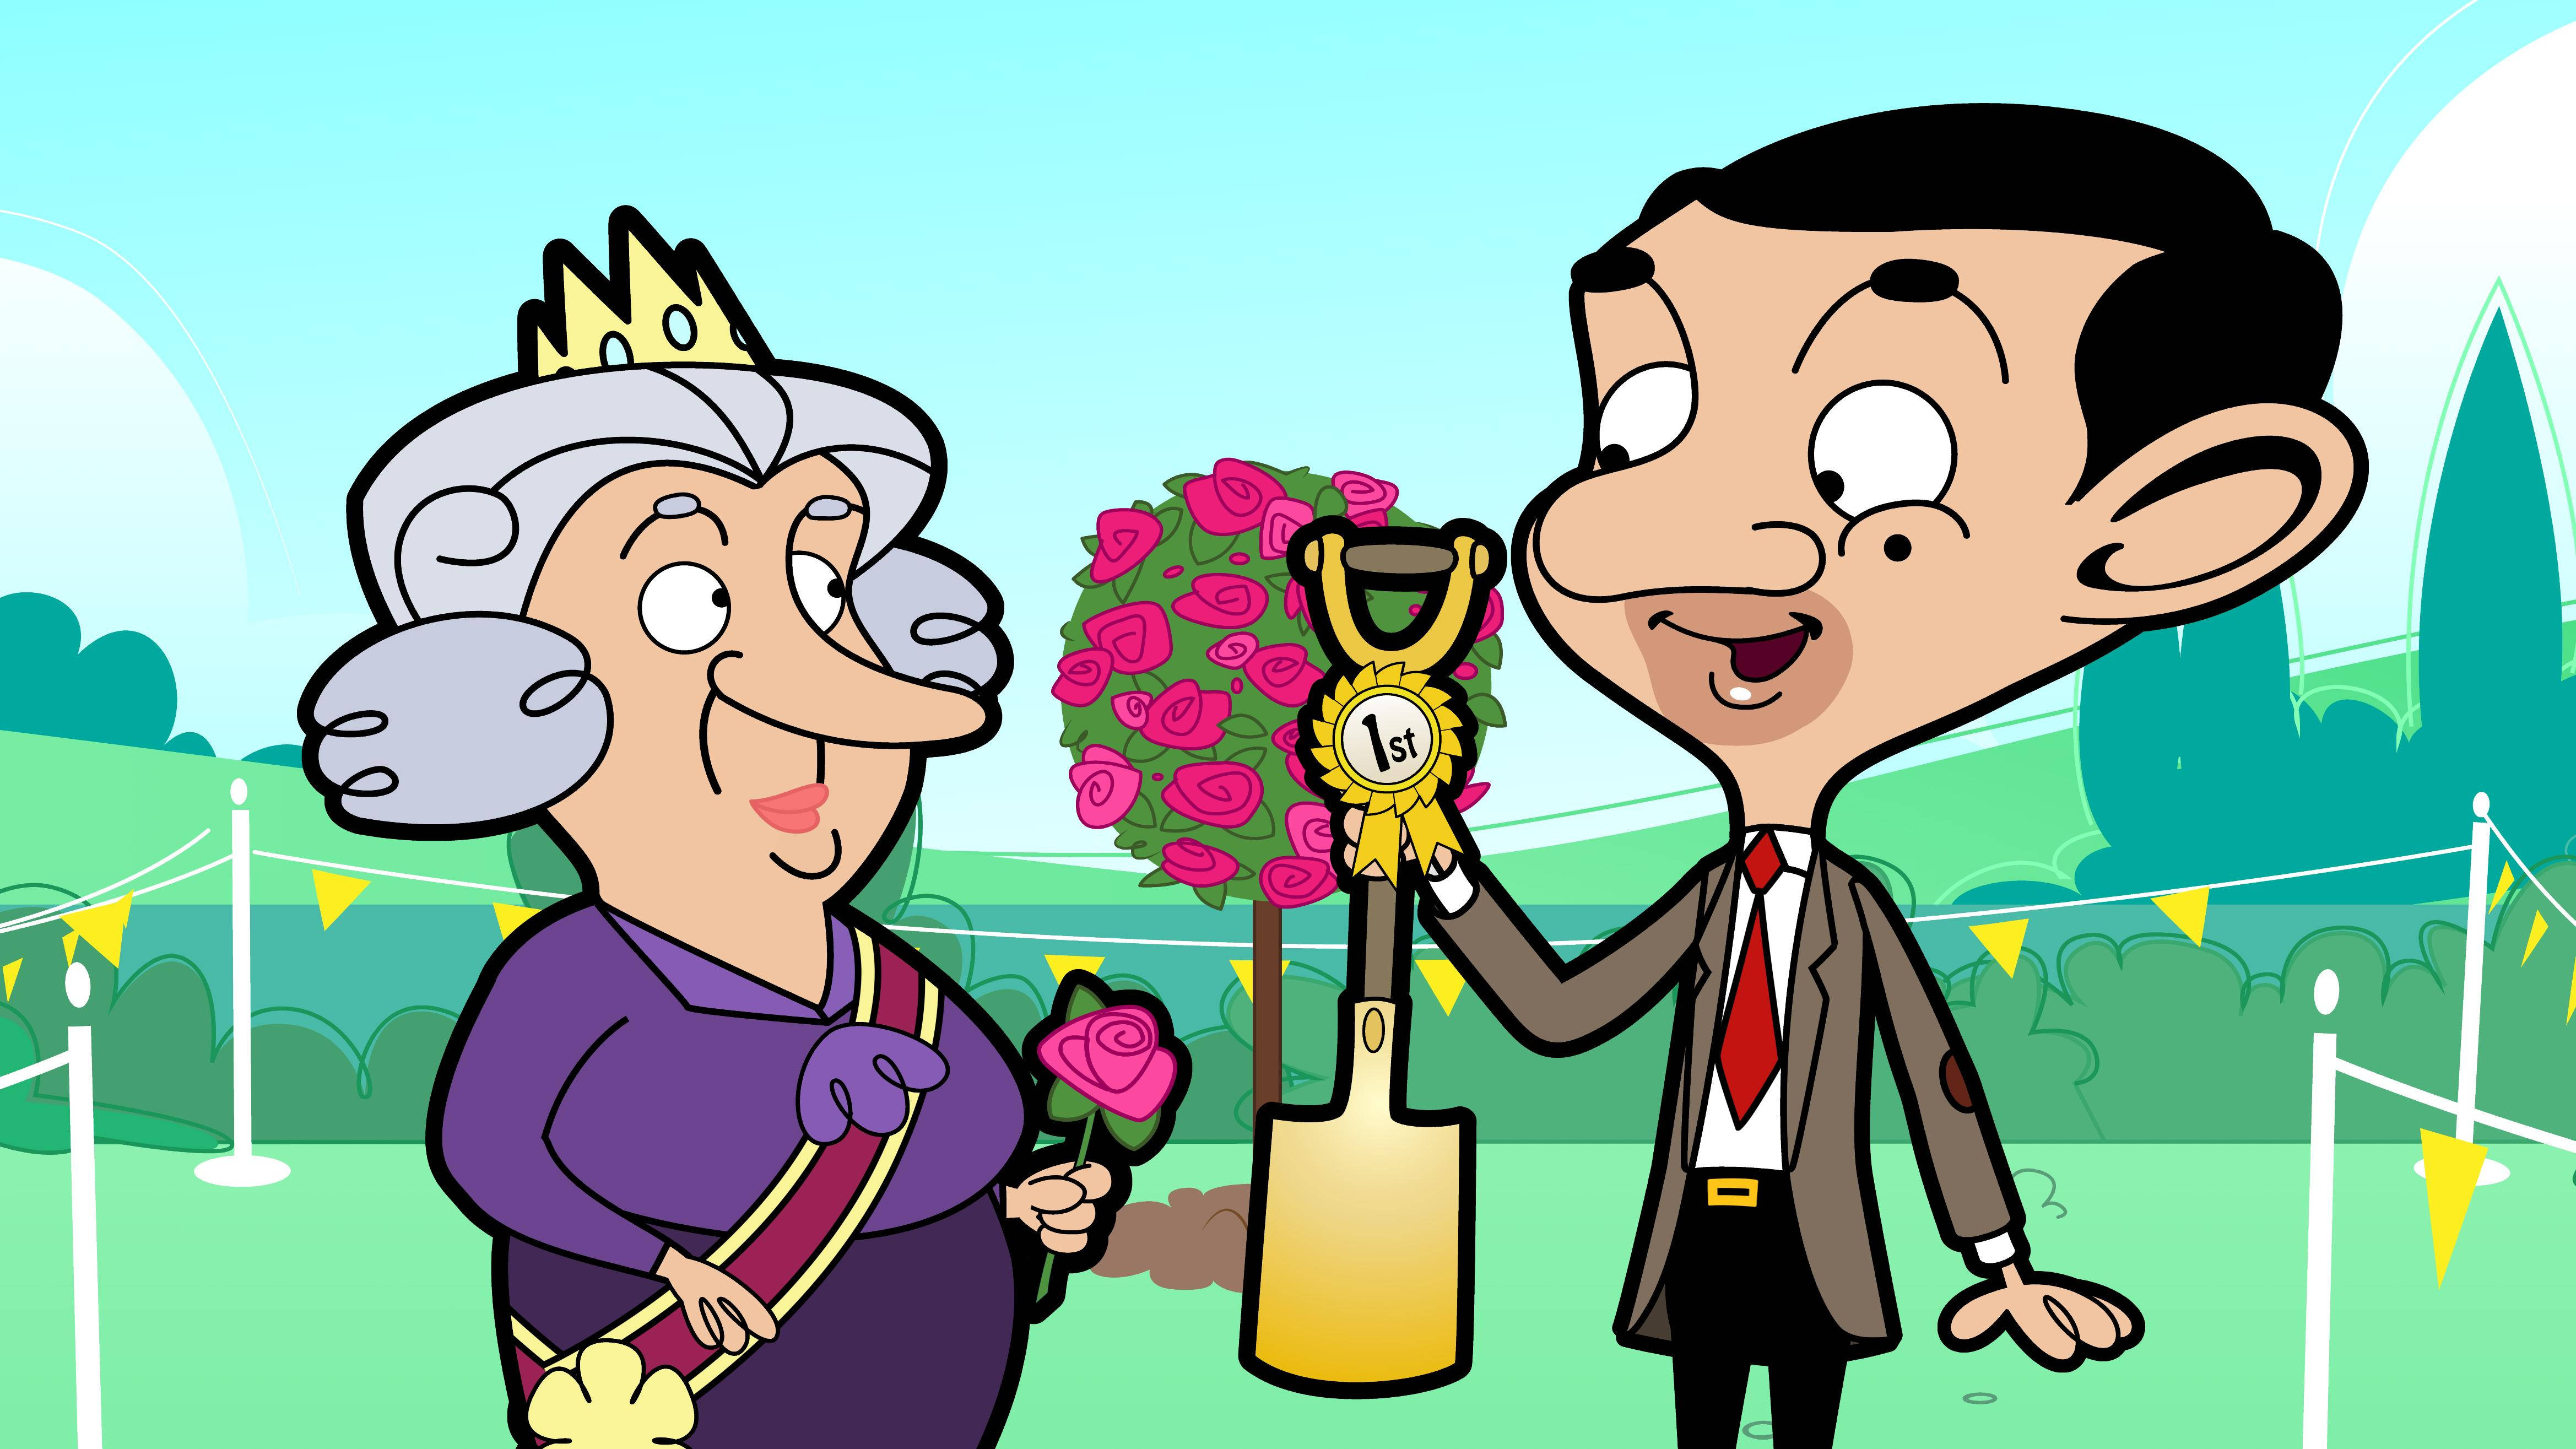 Mr. Bean In Suit Holding A Trophy Wallpaper